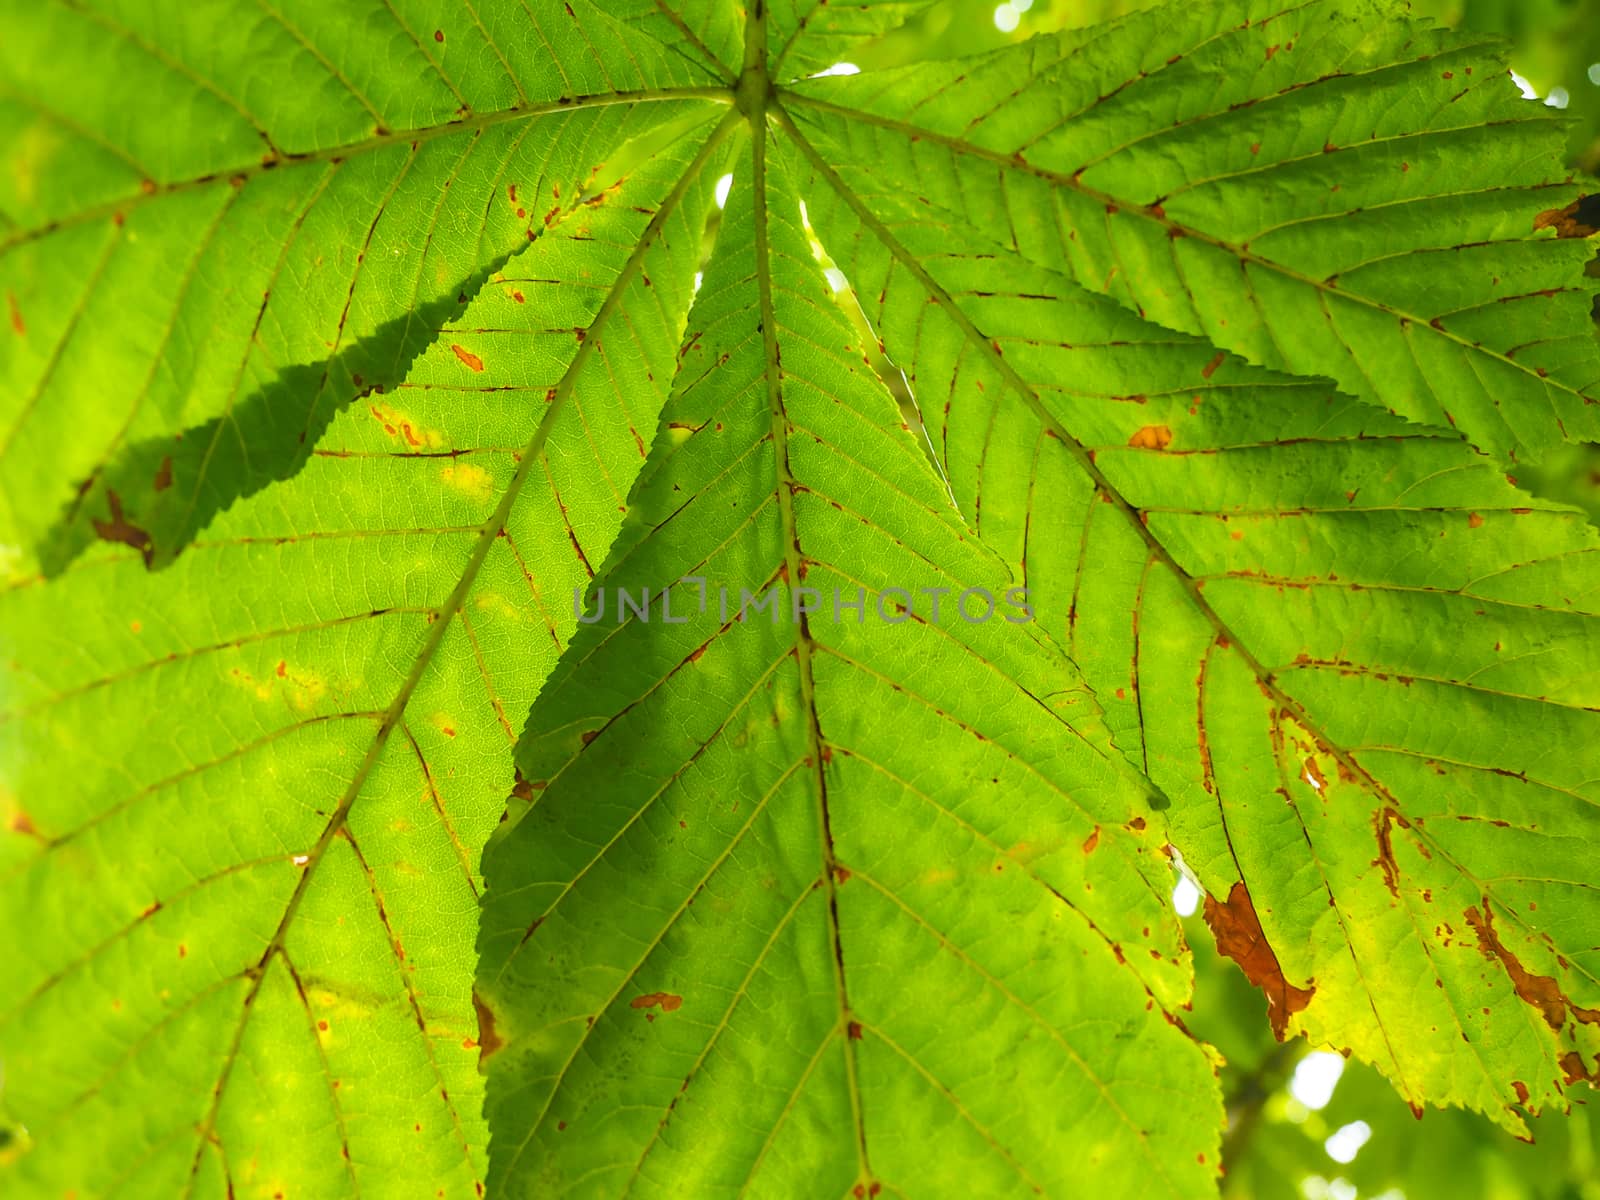 Castania leaf at closeup outdoors in daylight by Arvebettum